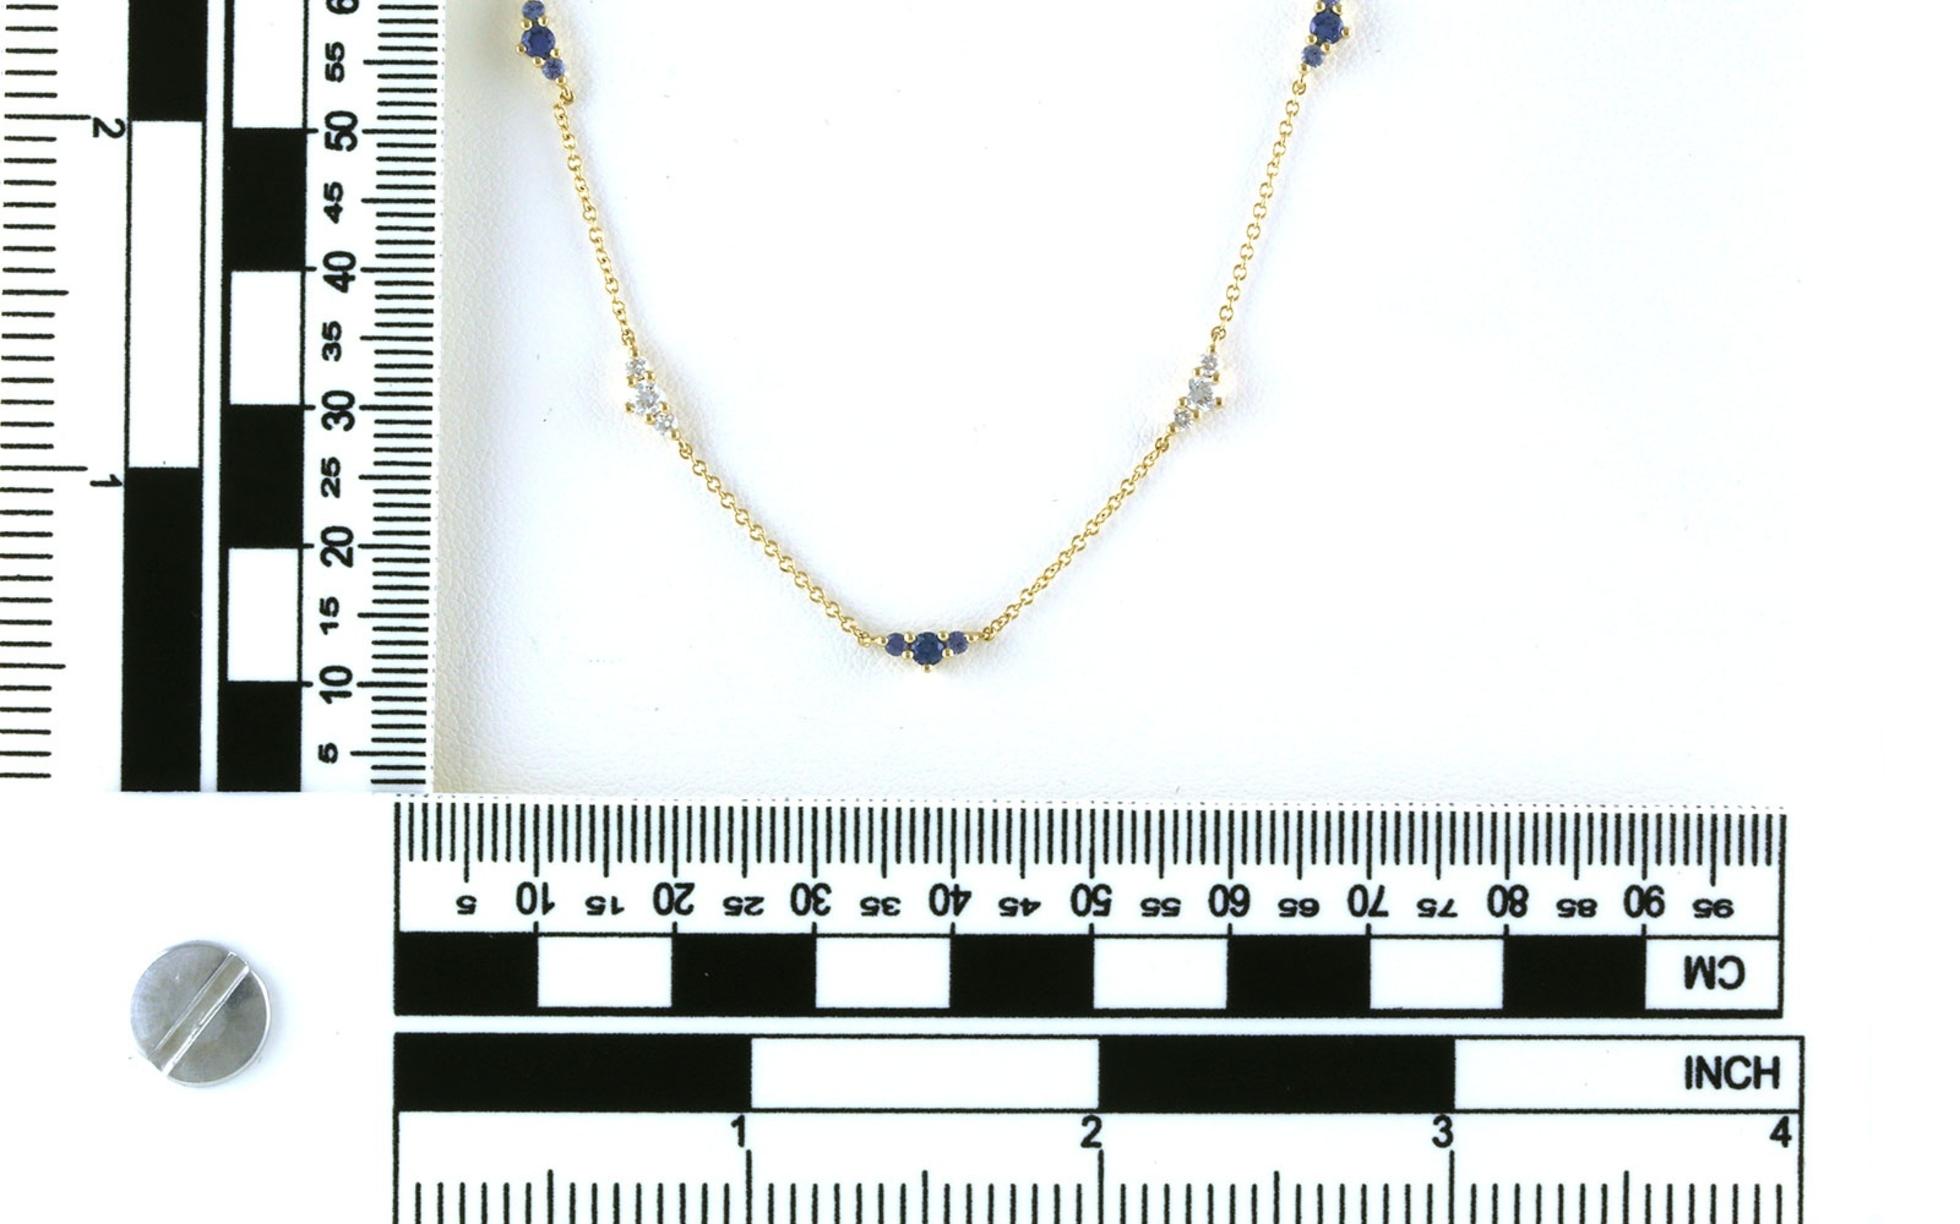 3-Stone Cluster Montana Yogo Sapphire and Diamond Station Necklace in Yellow Gold (0.58cts TWT) Scale